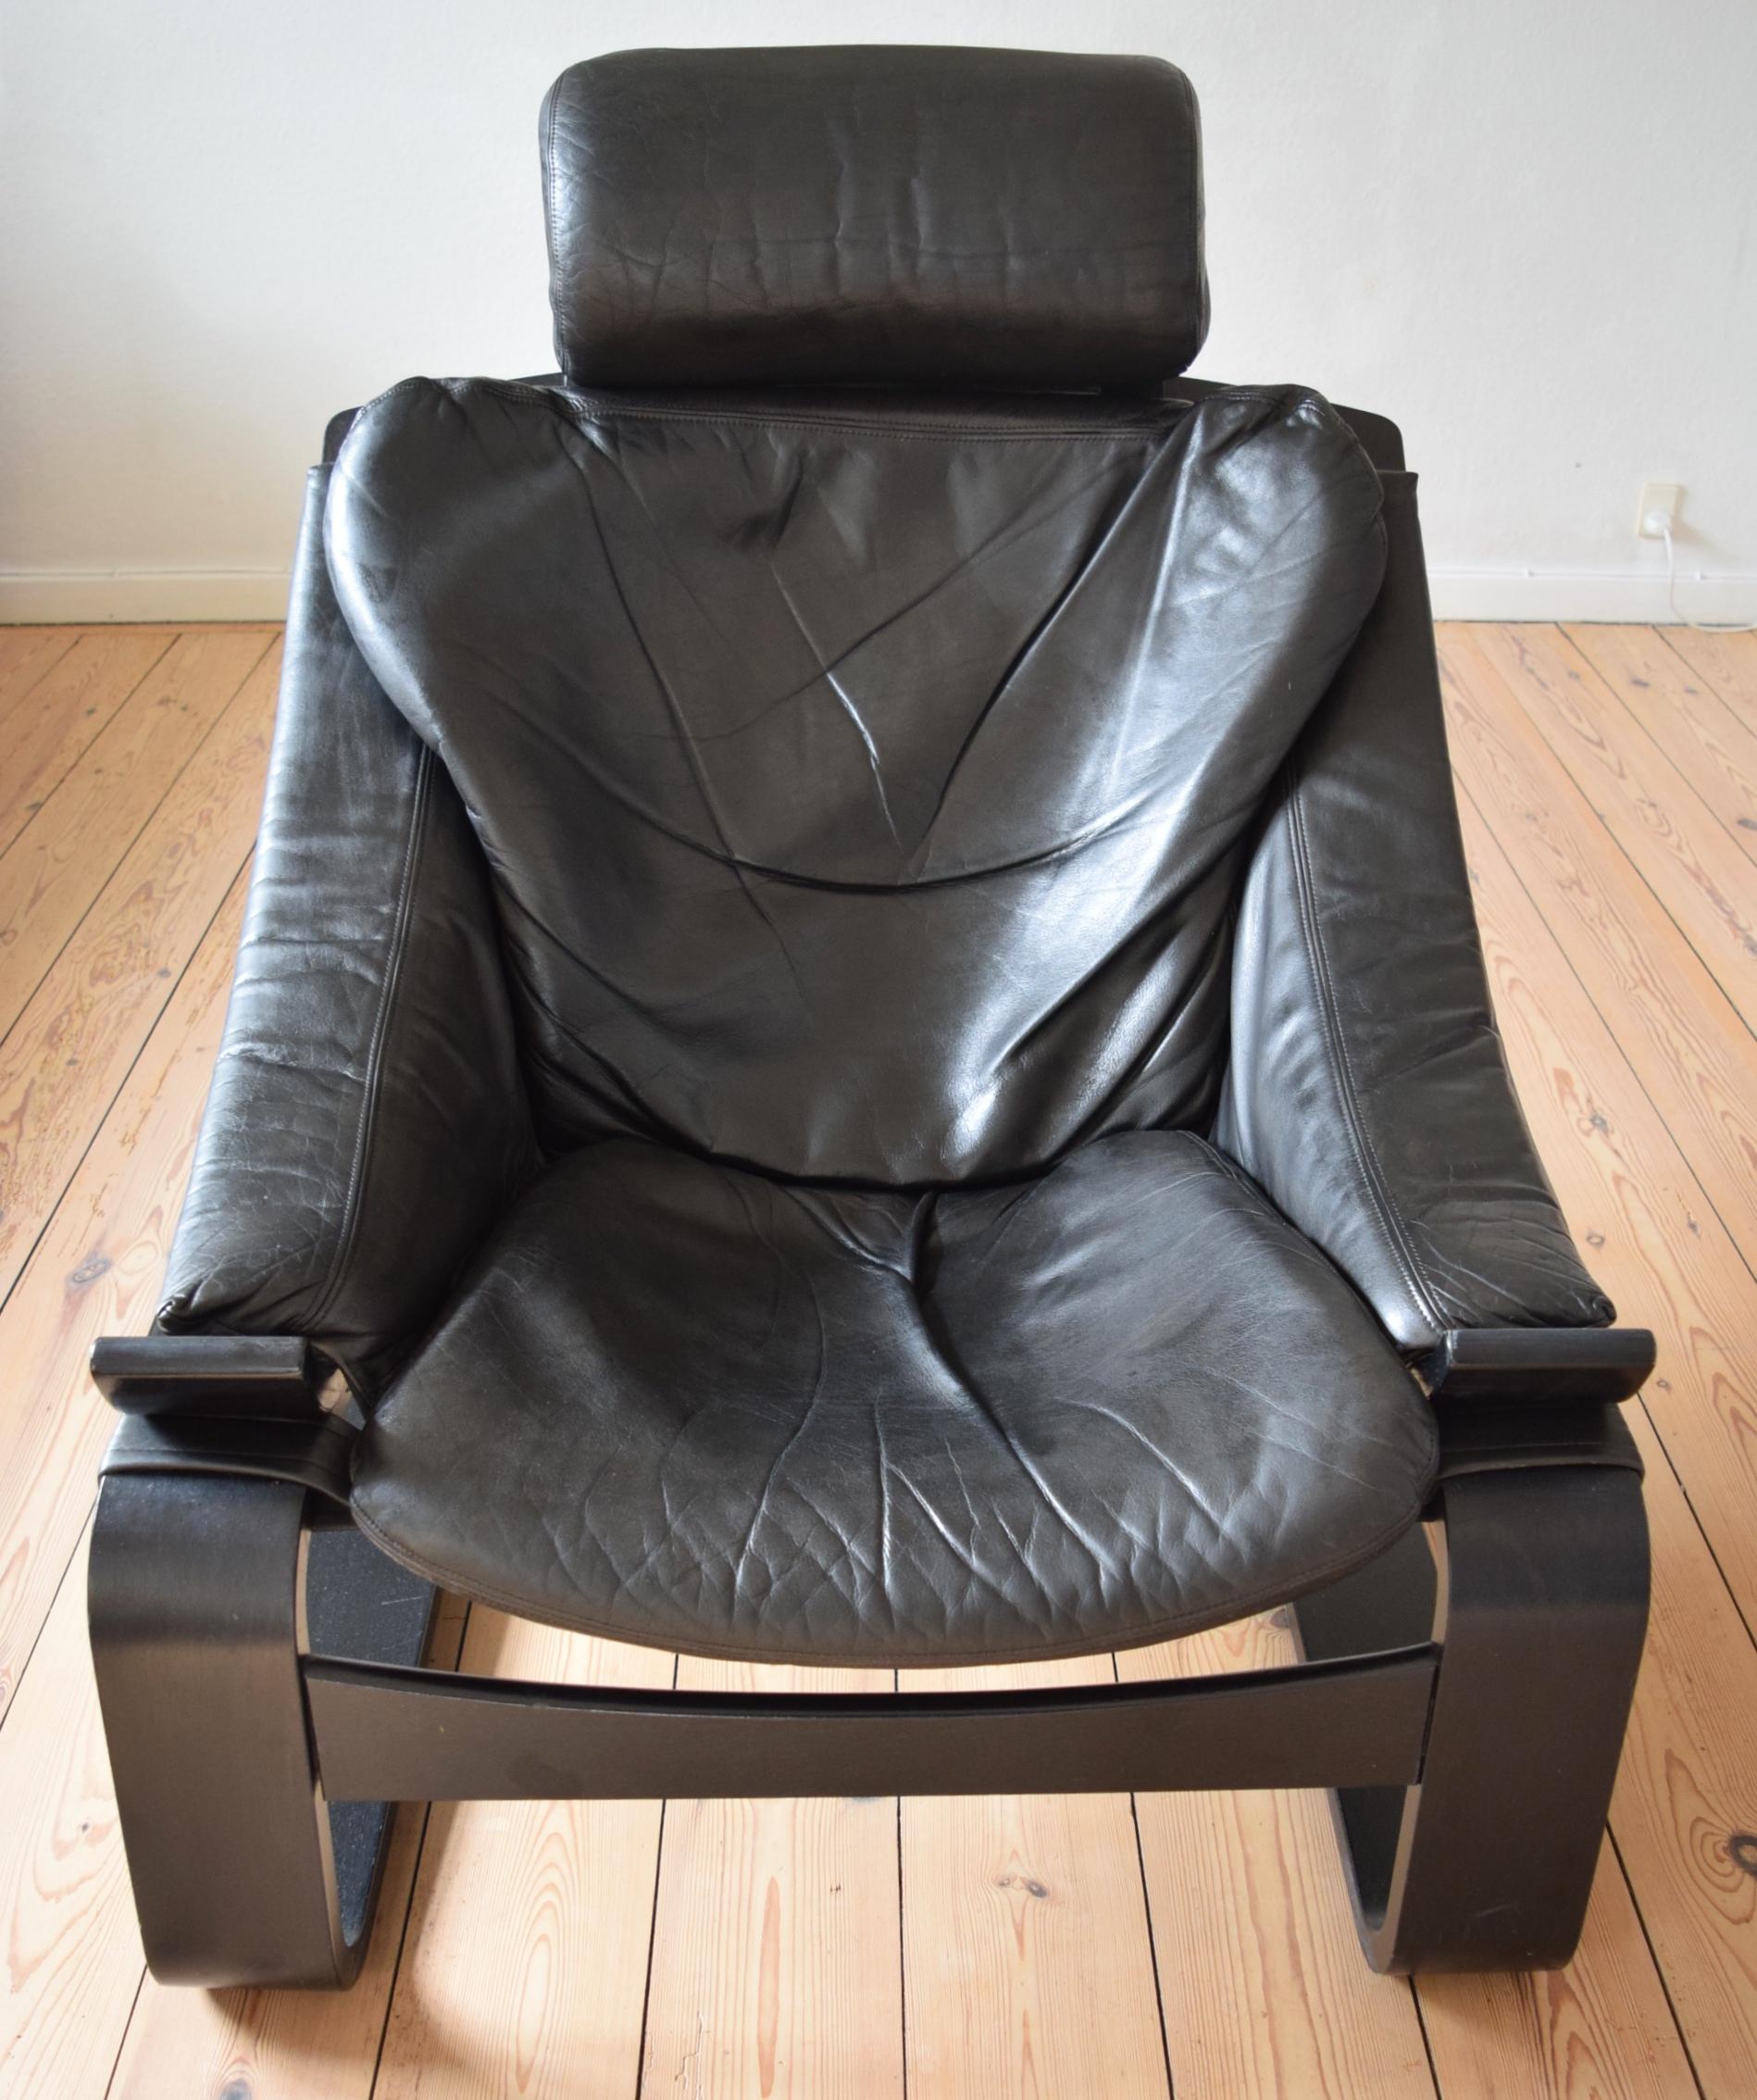 Midcentury Swedish Leather Kroken Chairs by Ake Fribytter for Nelo, 1974 For Sale 7